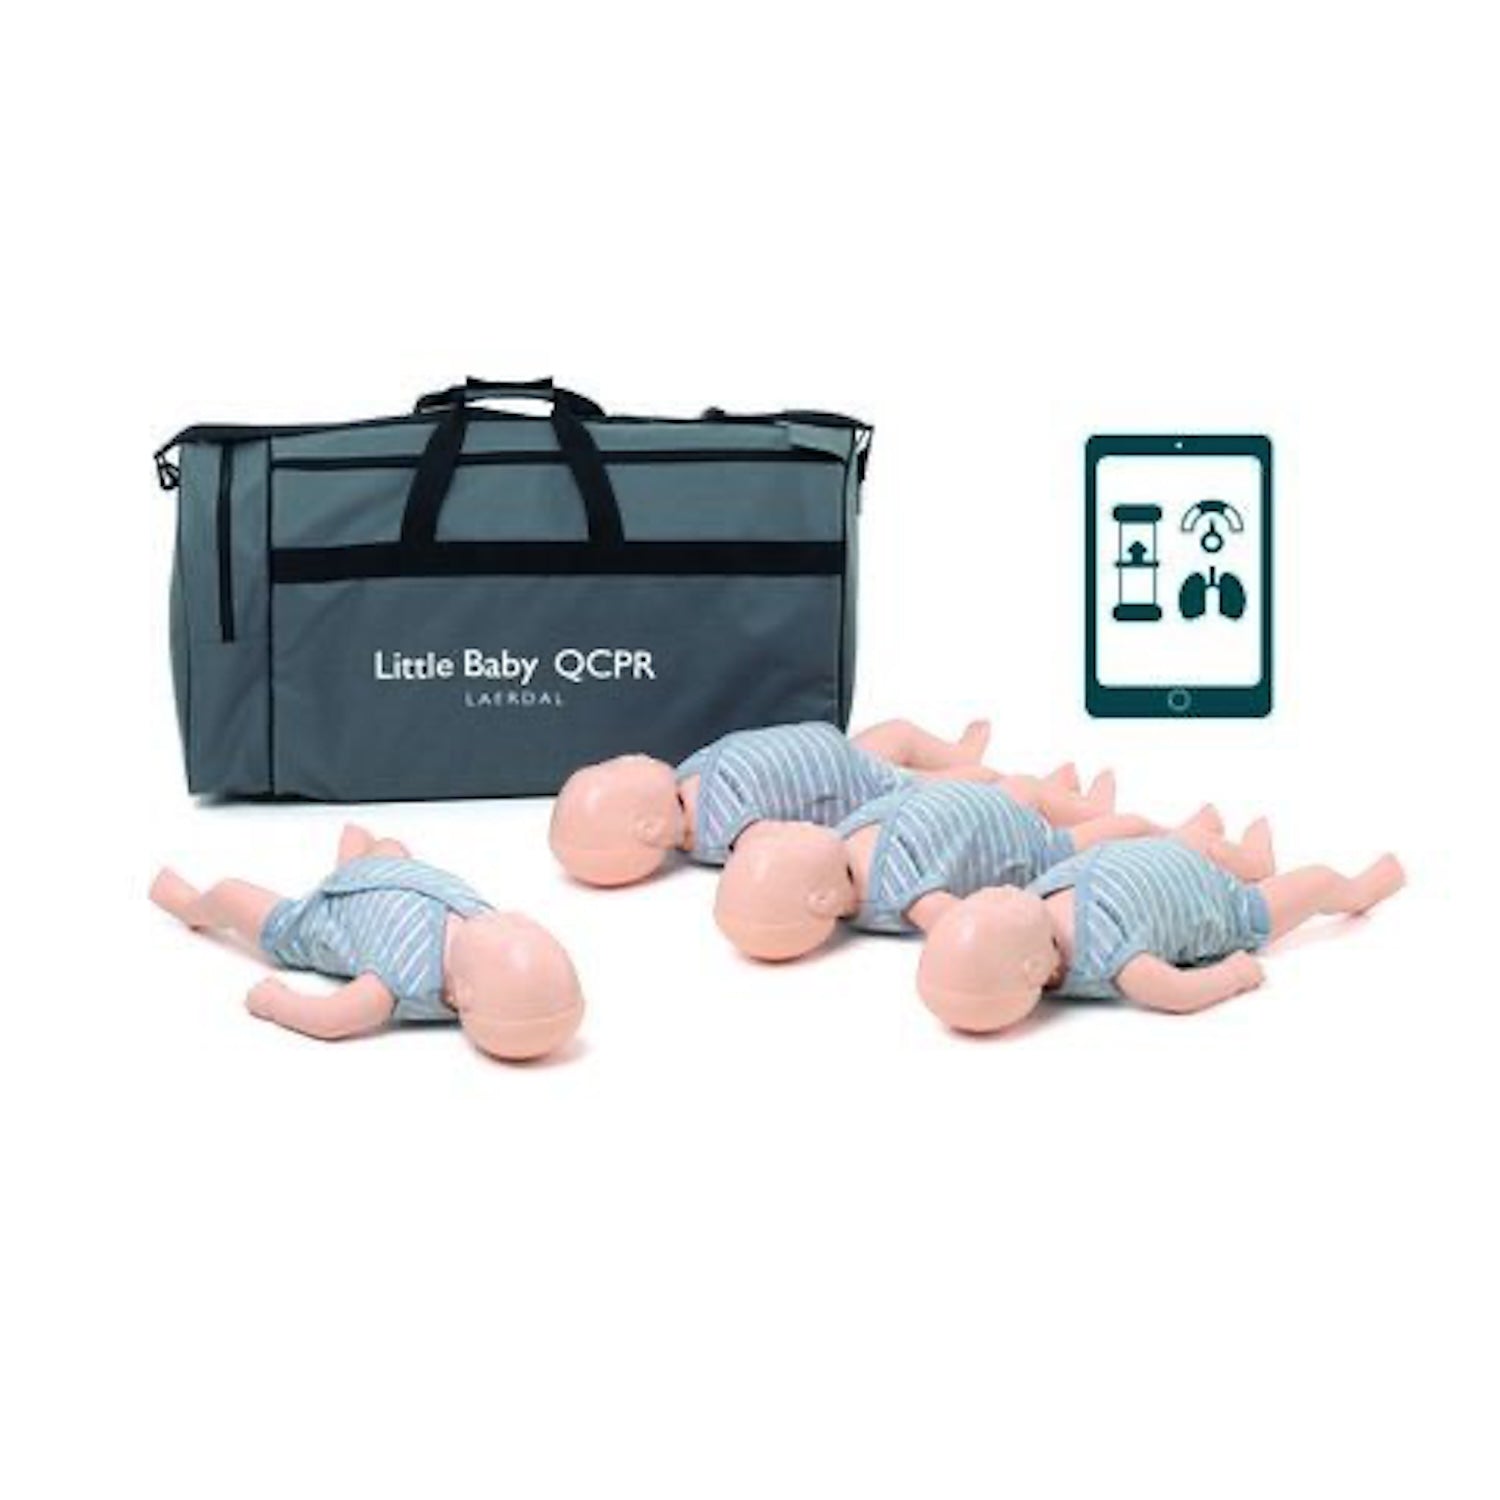 Little Baby QCPR | Pack of 4